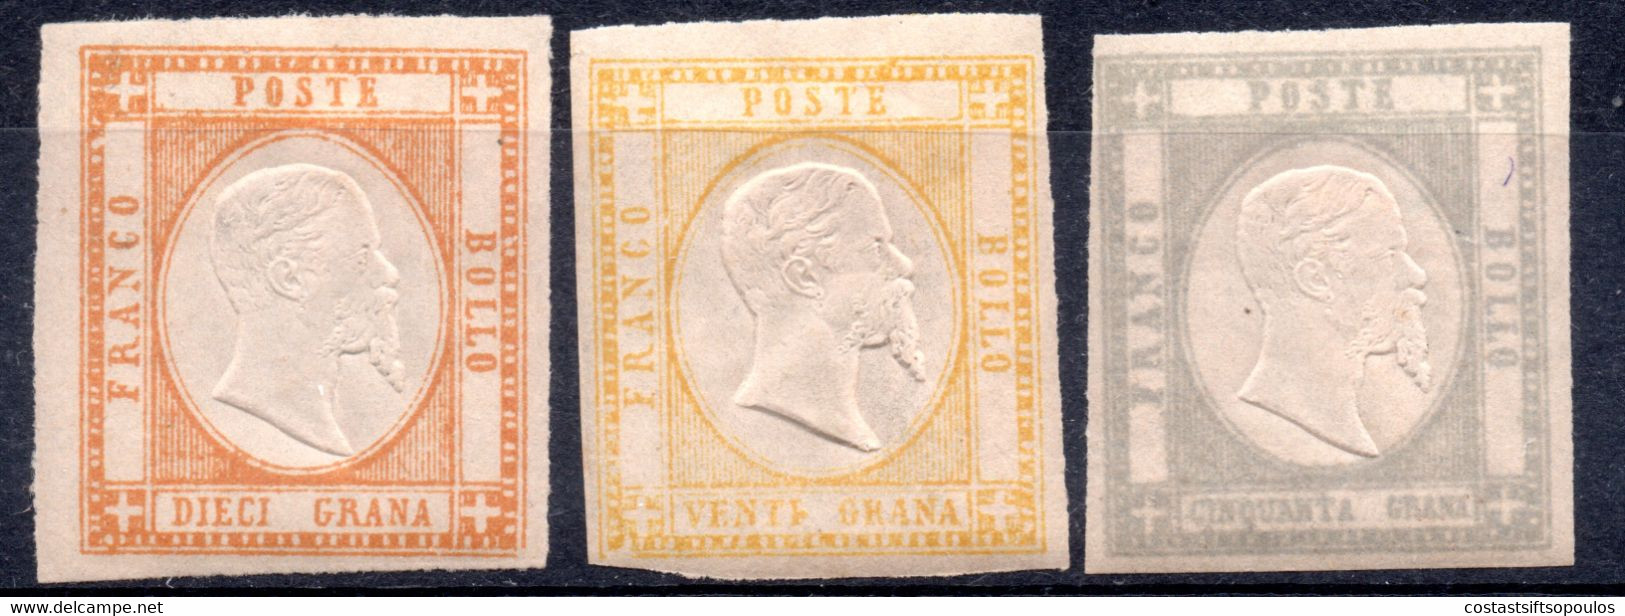 626.ITALY.TWO SICILIES,NEAPOLITAN PROVINCES,1861 #19-27 MH,SOME FAULTS.9 SCANS